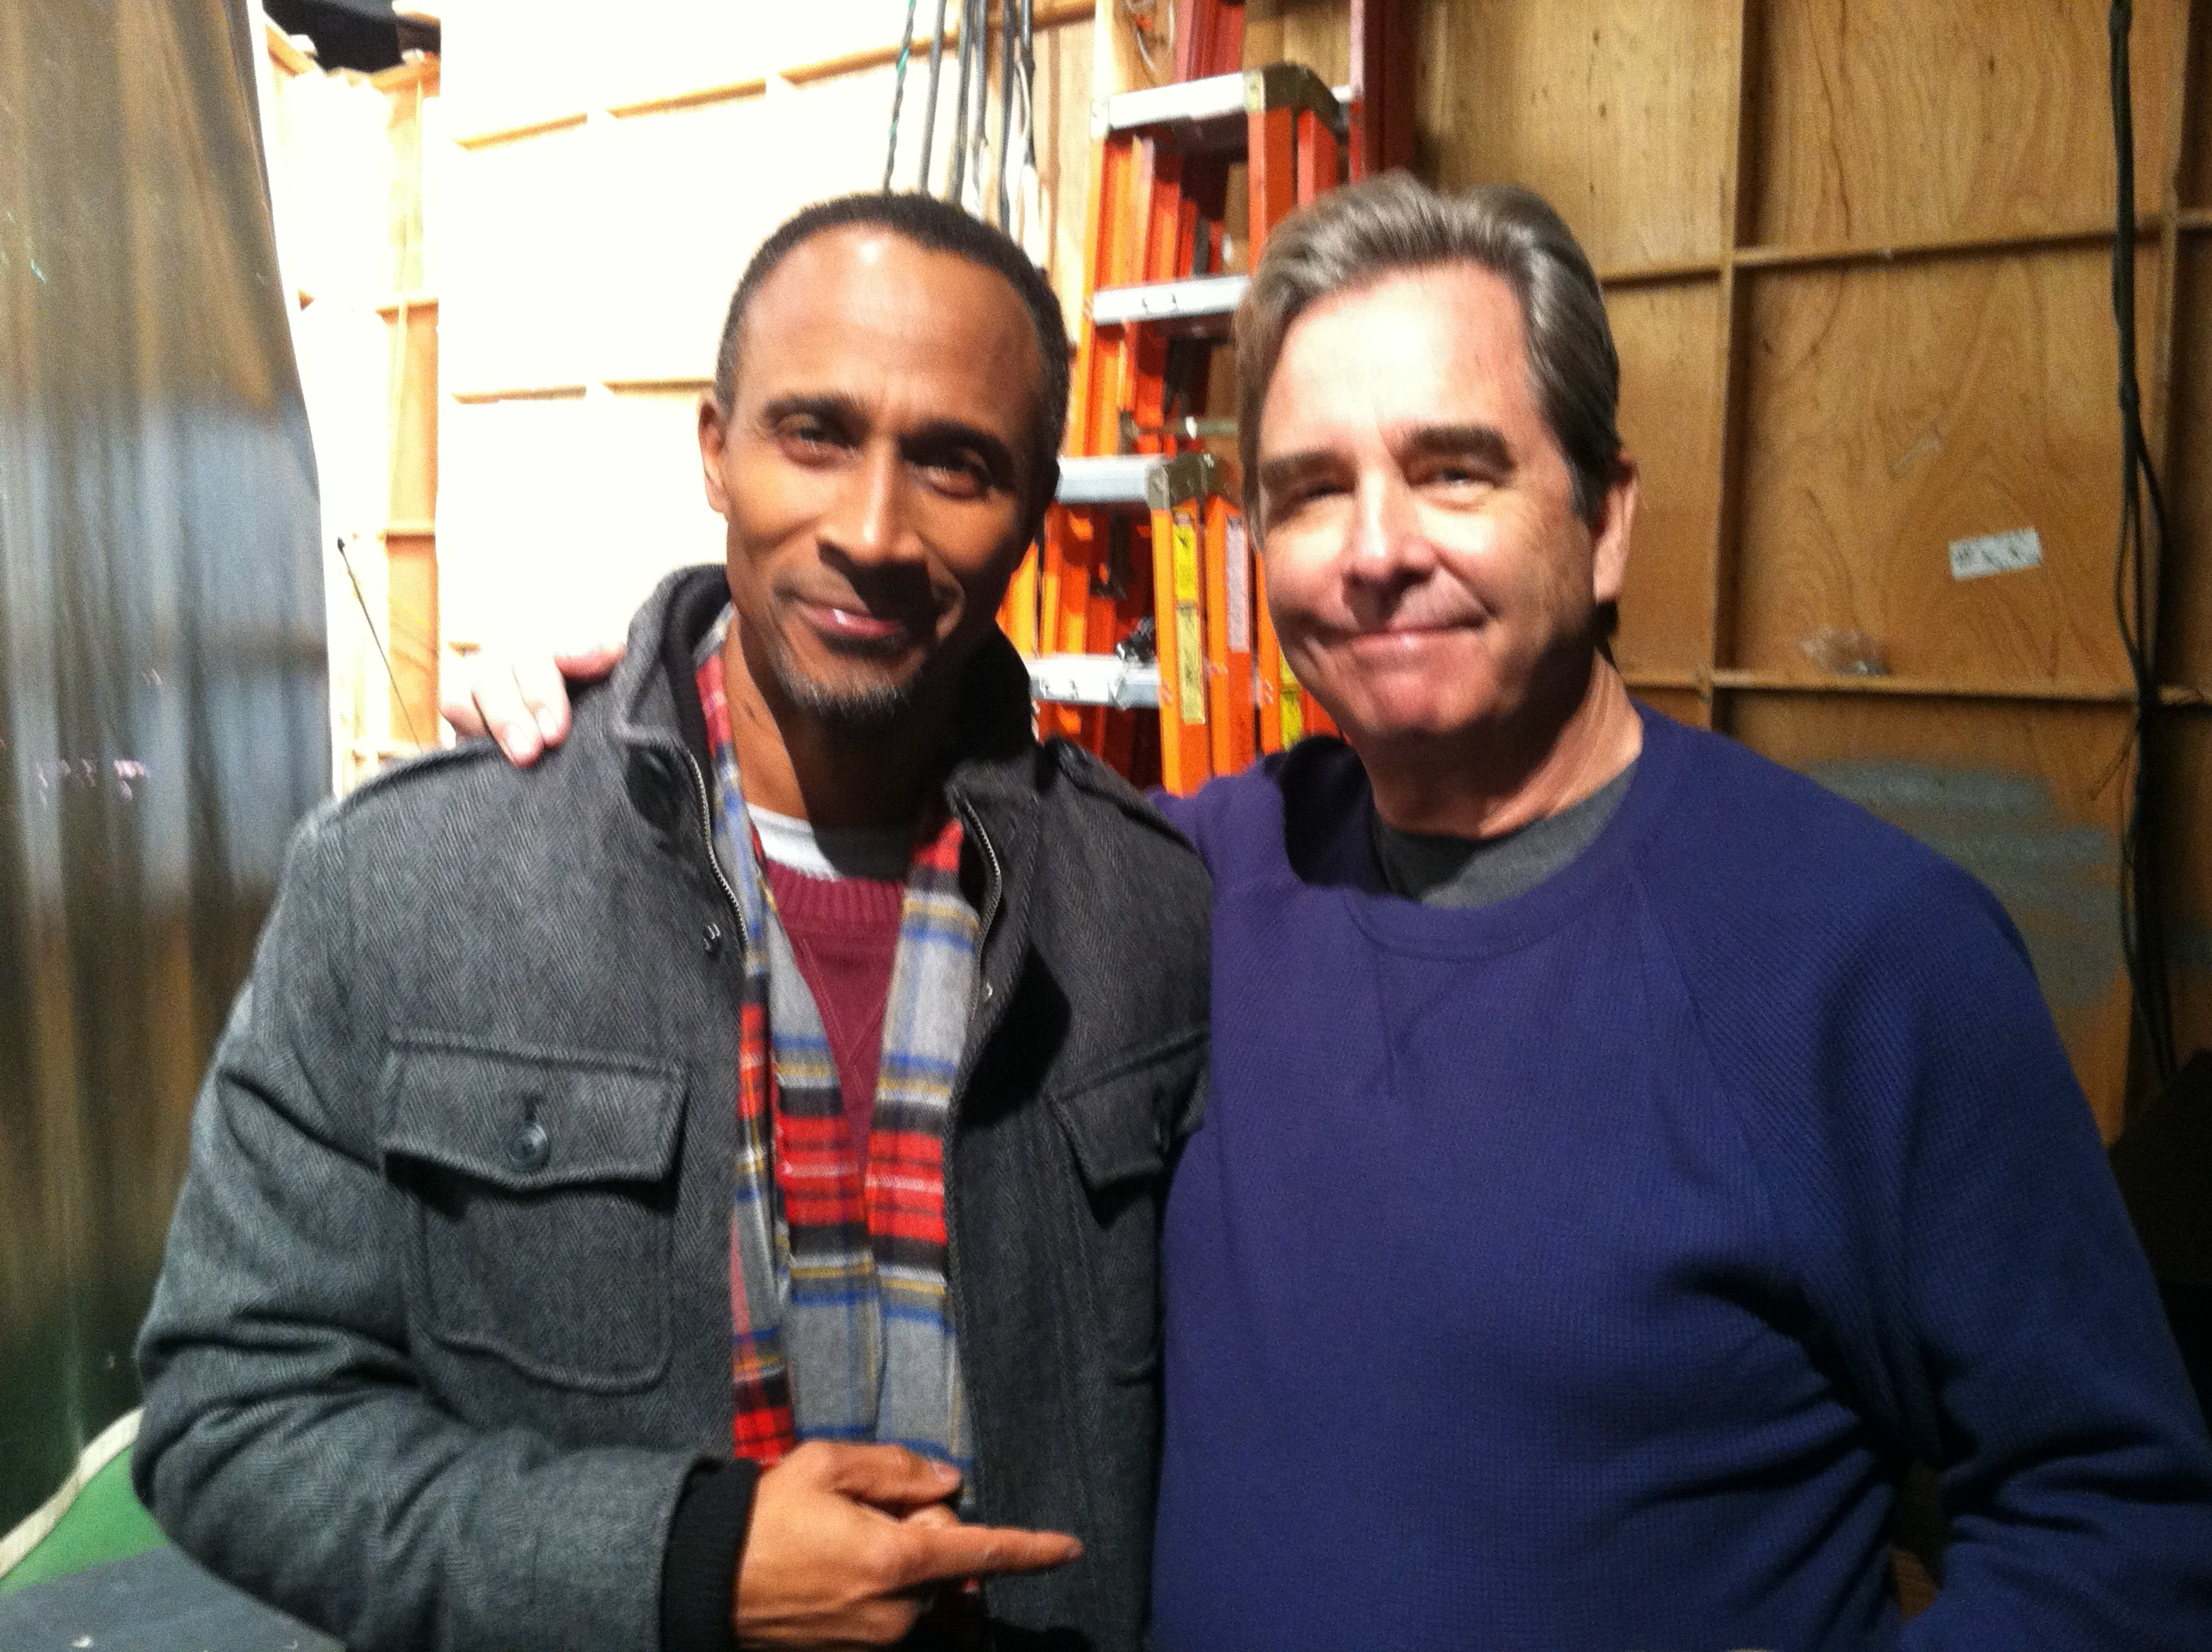 Gordon and Beau Bridges on the set of The Millers